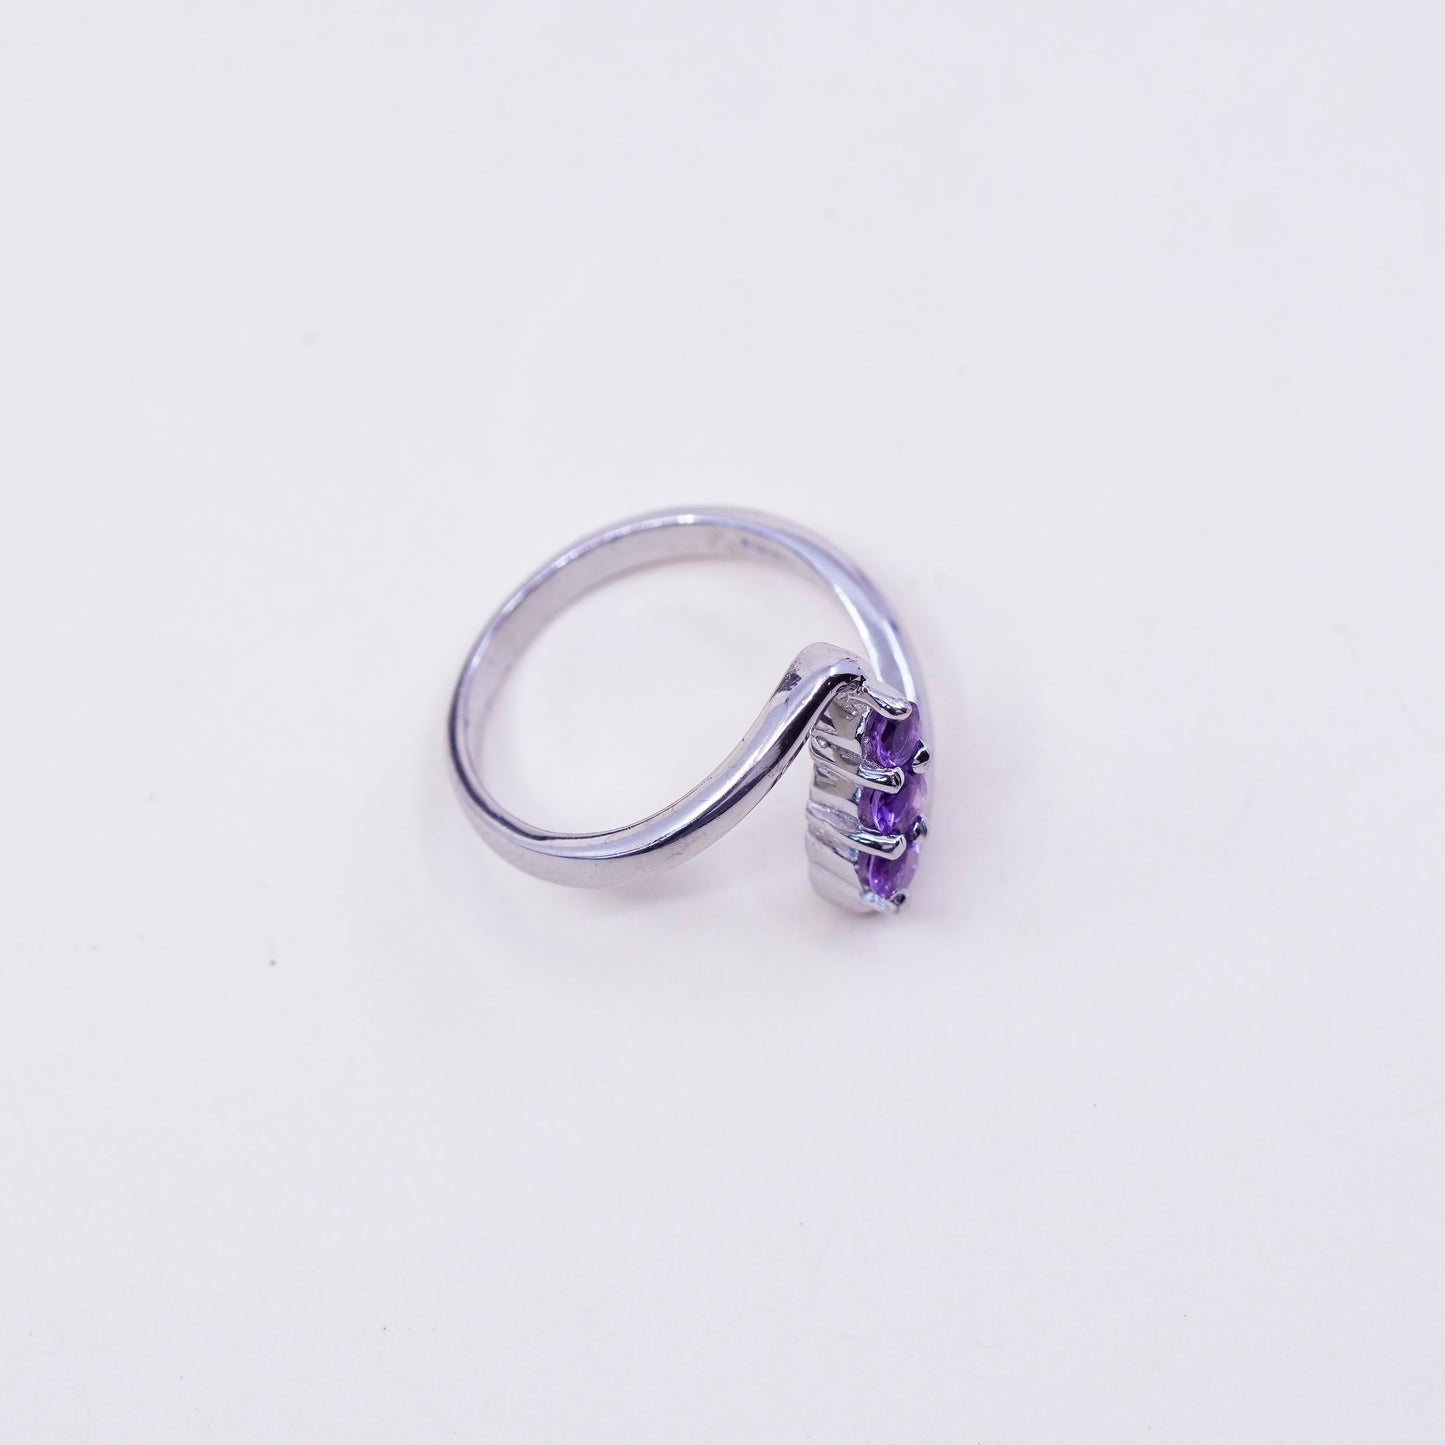 Size 7.25, vintage Sterling silver handmade ring, wavy 925 with amethyst stone